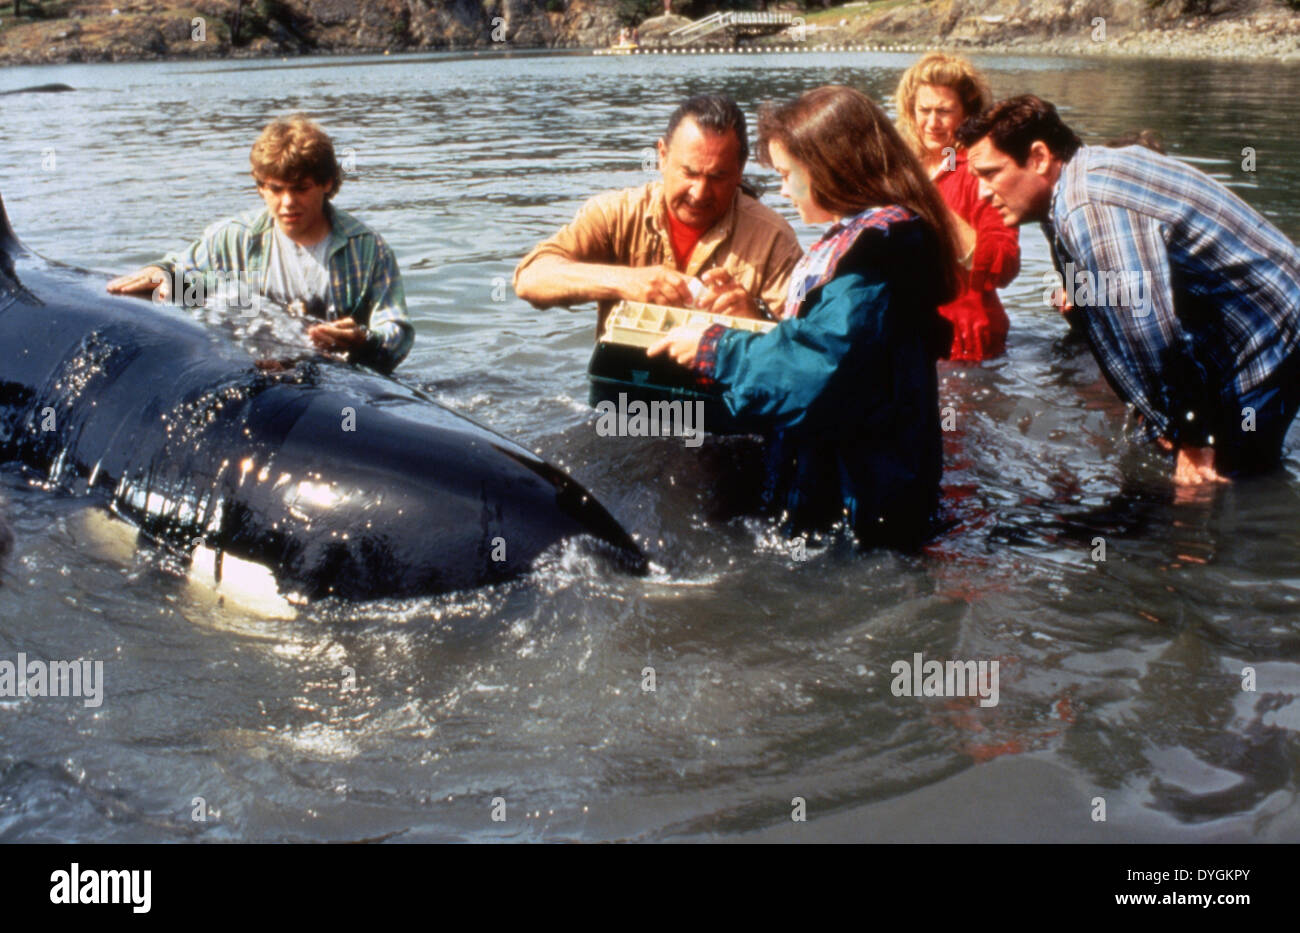 FREE WILLY 2: THE ADVENTURE HOME (1995) JASON JAMES RICHTER, DWIGHT LITTLE (DIR) FWY2 004 MOVIESTORE COLLECTION LTD Stock Photo